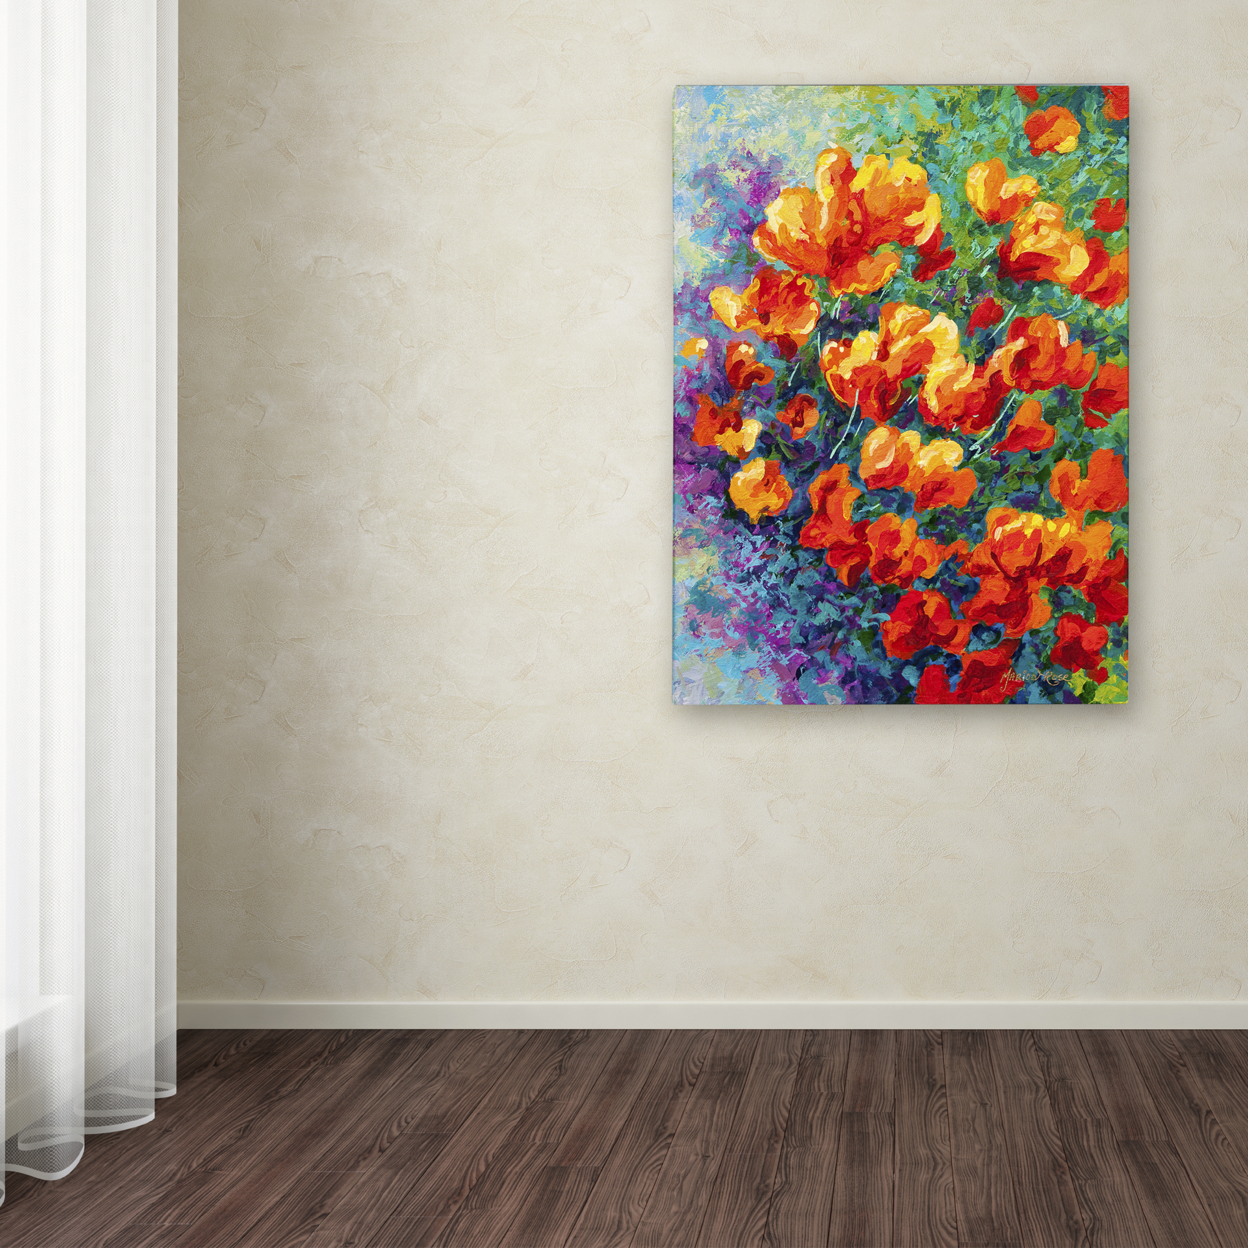 Marion Rose 'Cal Poppies' Ready To Hang Canvas Art 24 X 32 Inches Made In USA